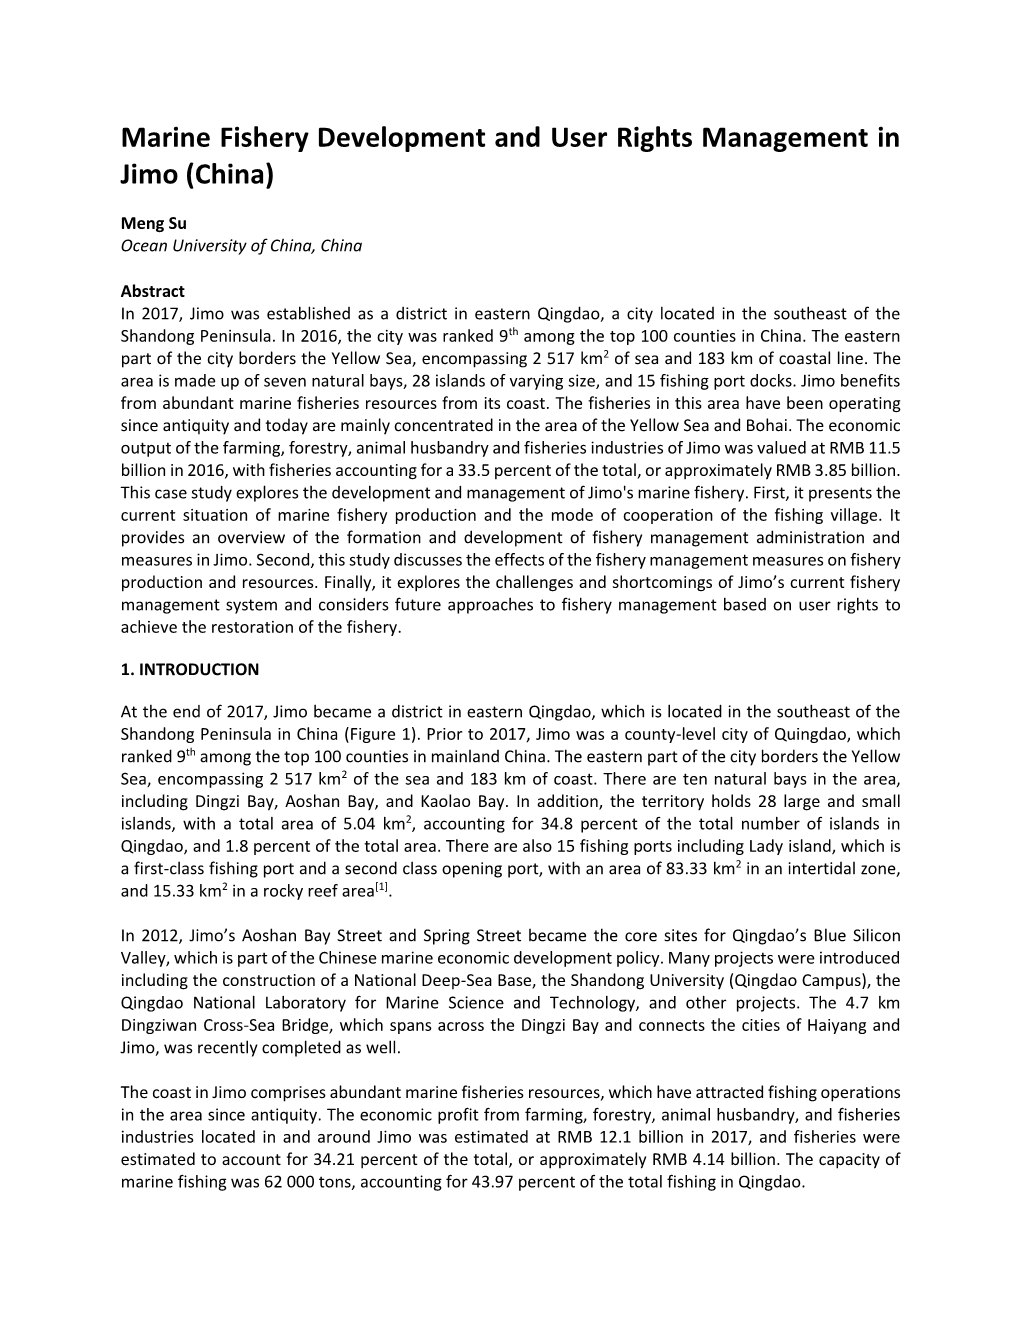 Marine Fishery Development and User Rights Management in Jimo (China)